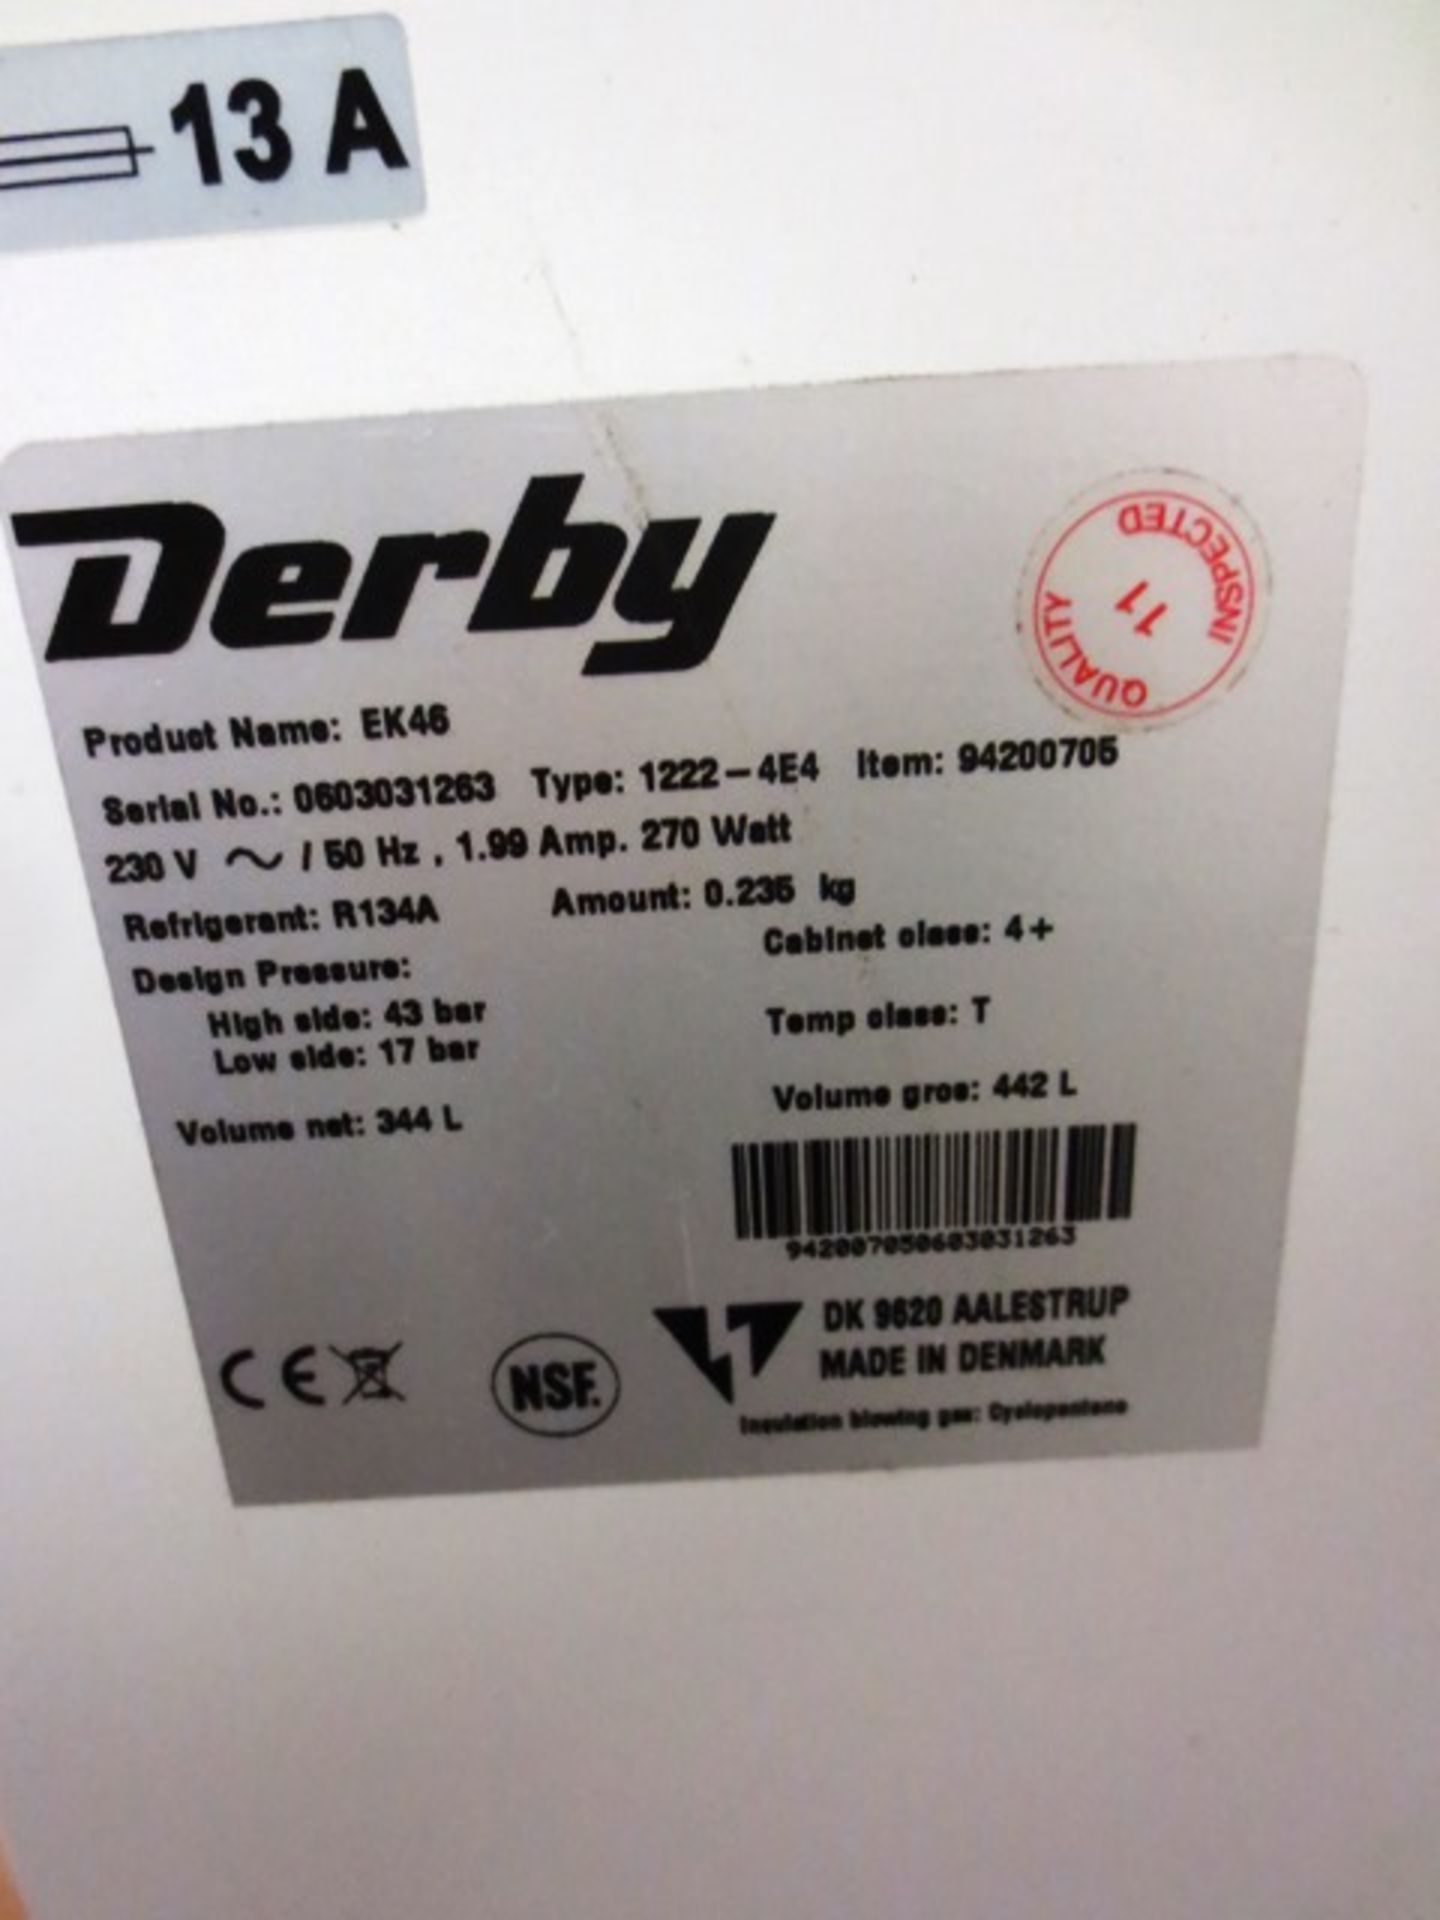 Derby EK46L twin glass sliding door ice cream chest freezer, serial no: 0603031263, with overhead - Image 2 of 2